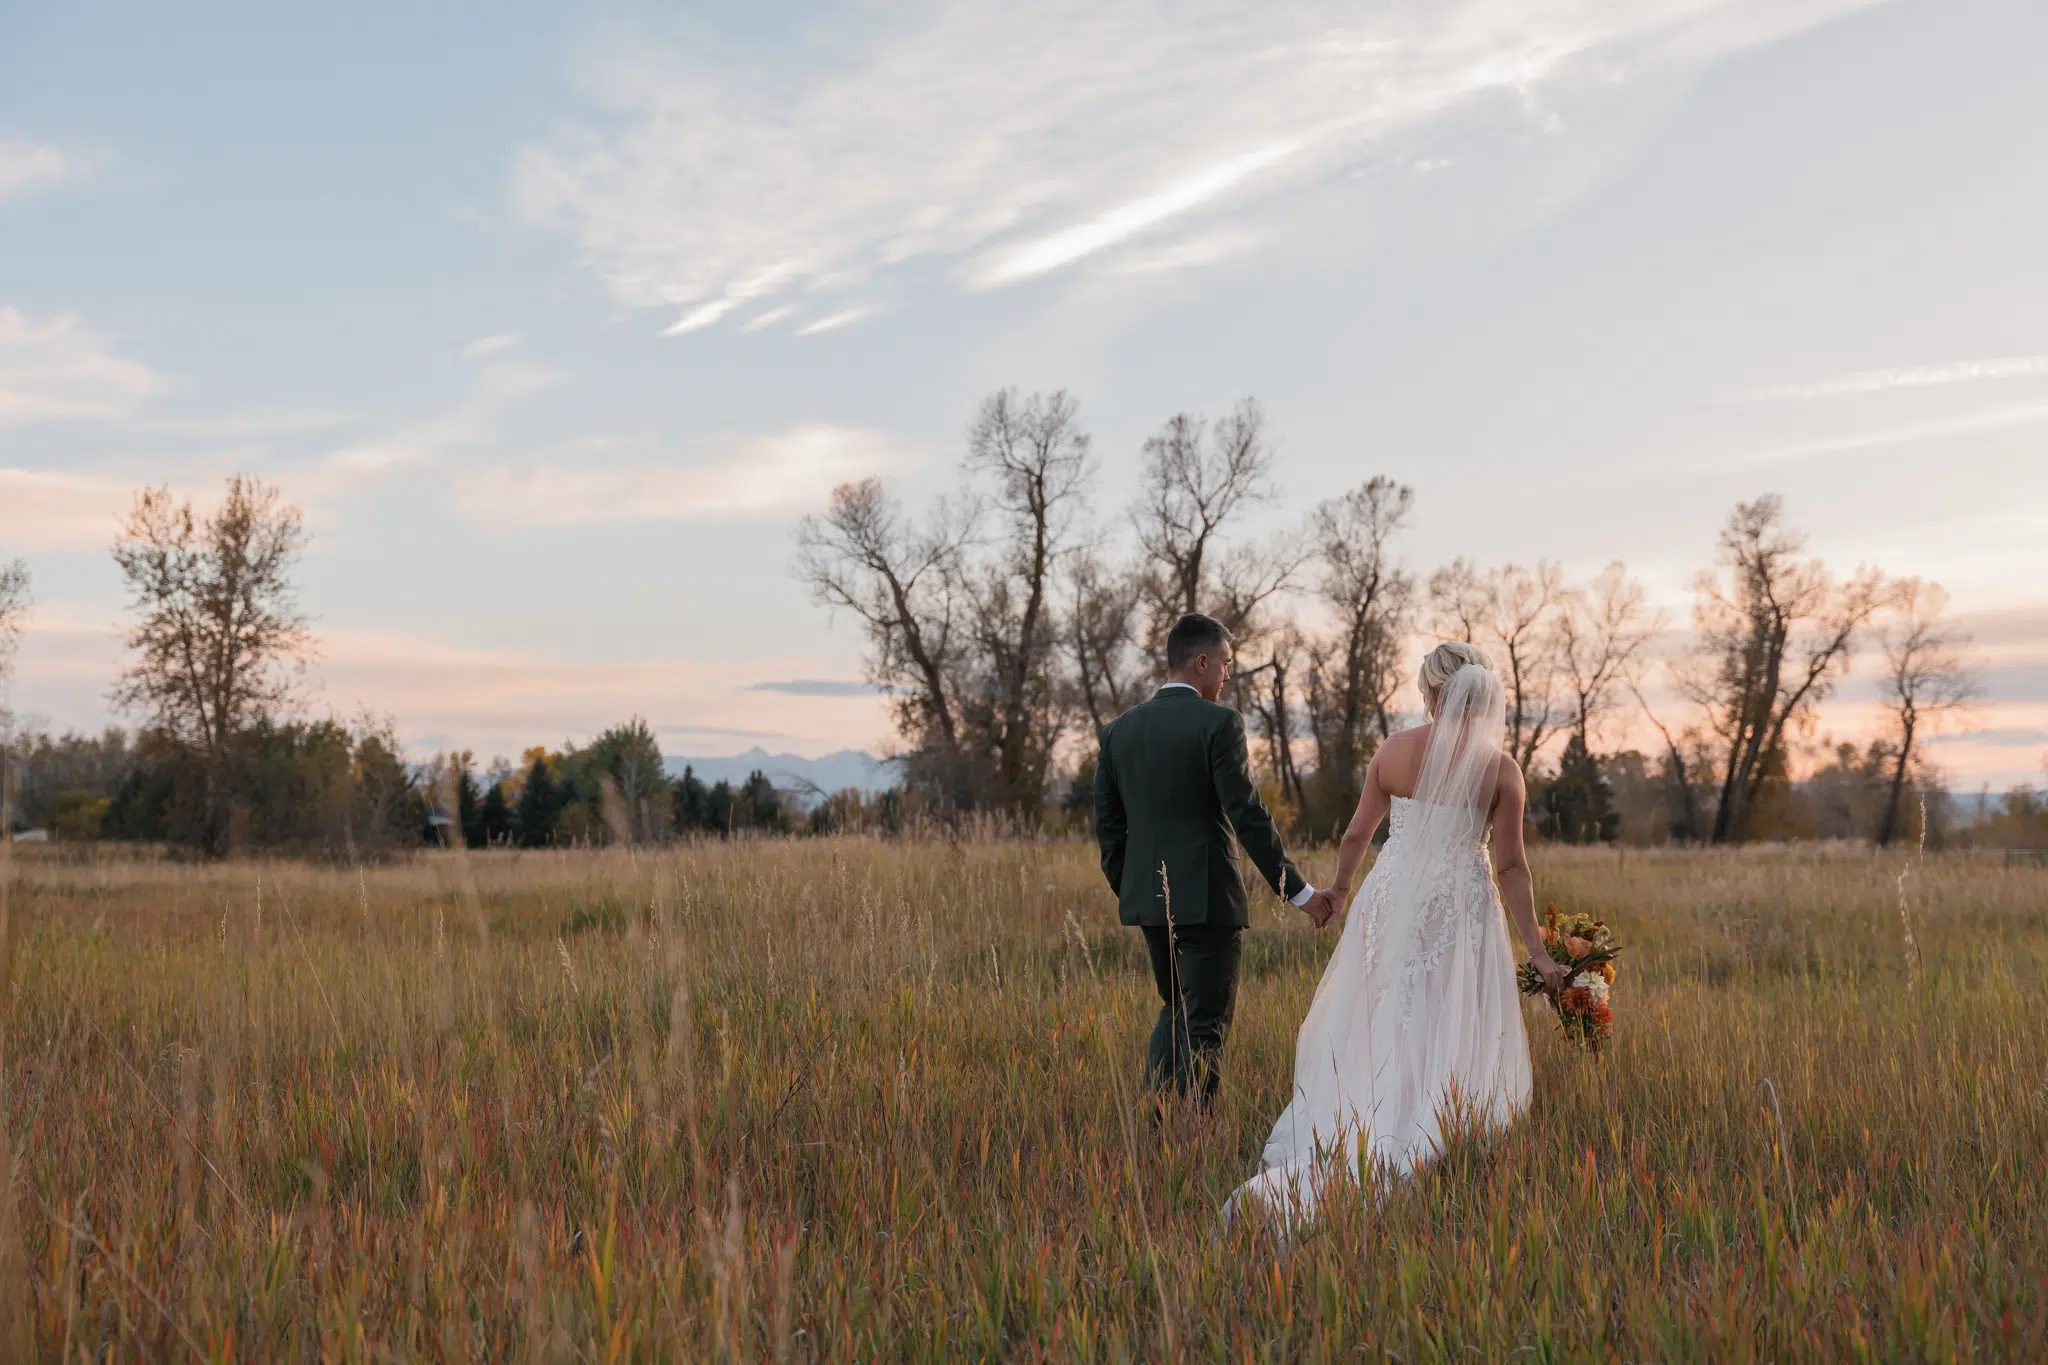 Wedding Venues In Bozeman Couple At The Chateau Event Center